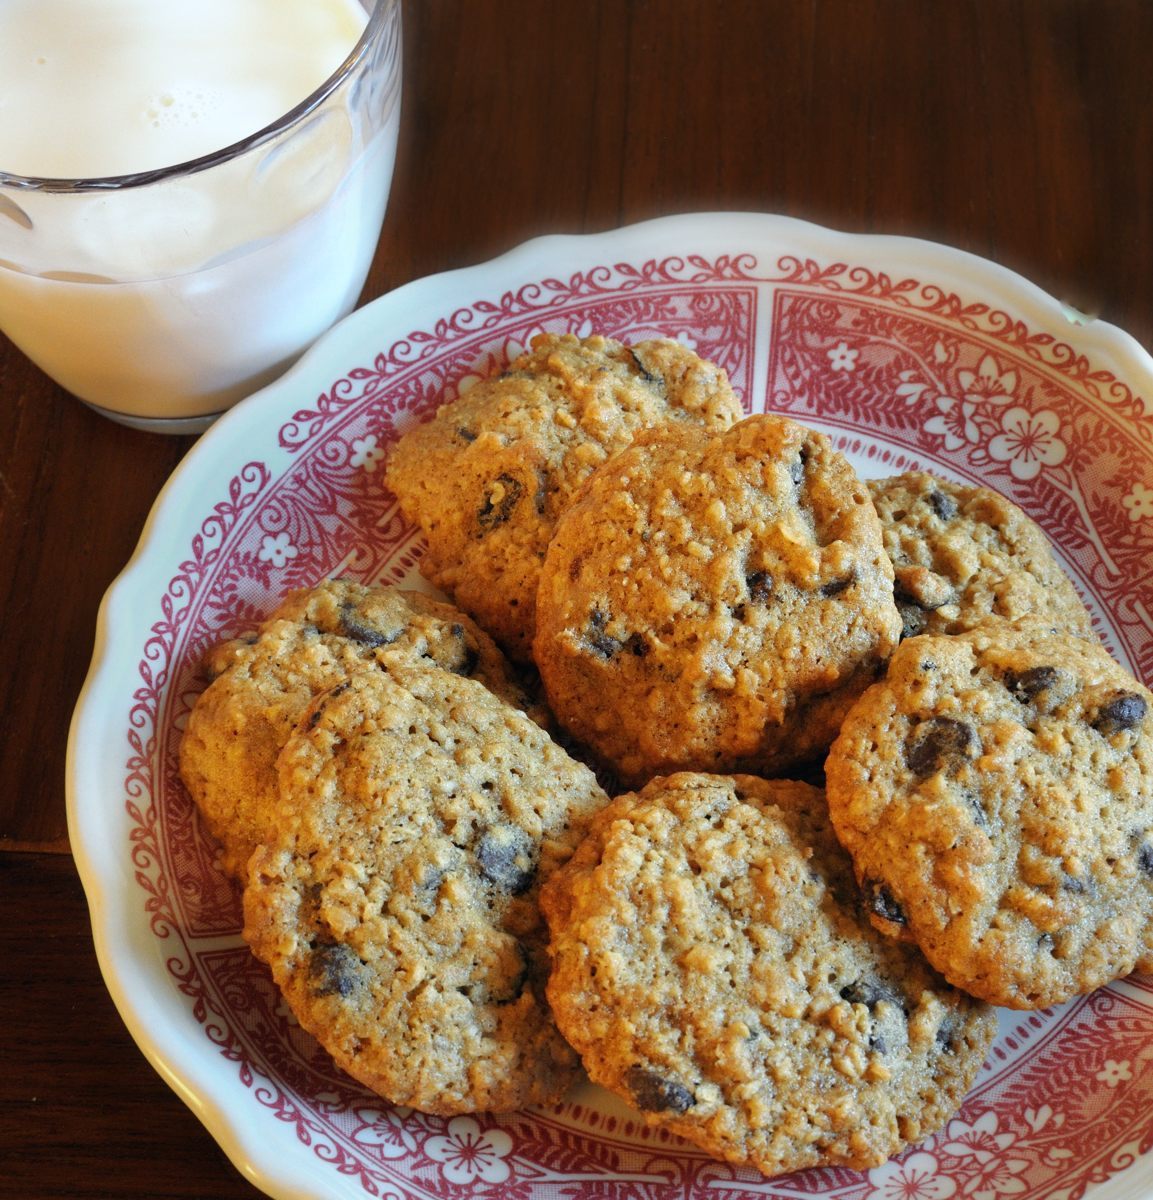 Raisin-Oatmeal Chocolate Chip Cookies, Glass of Milk, Red & Pink Plate